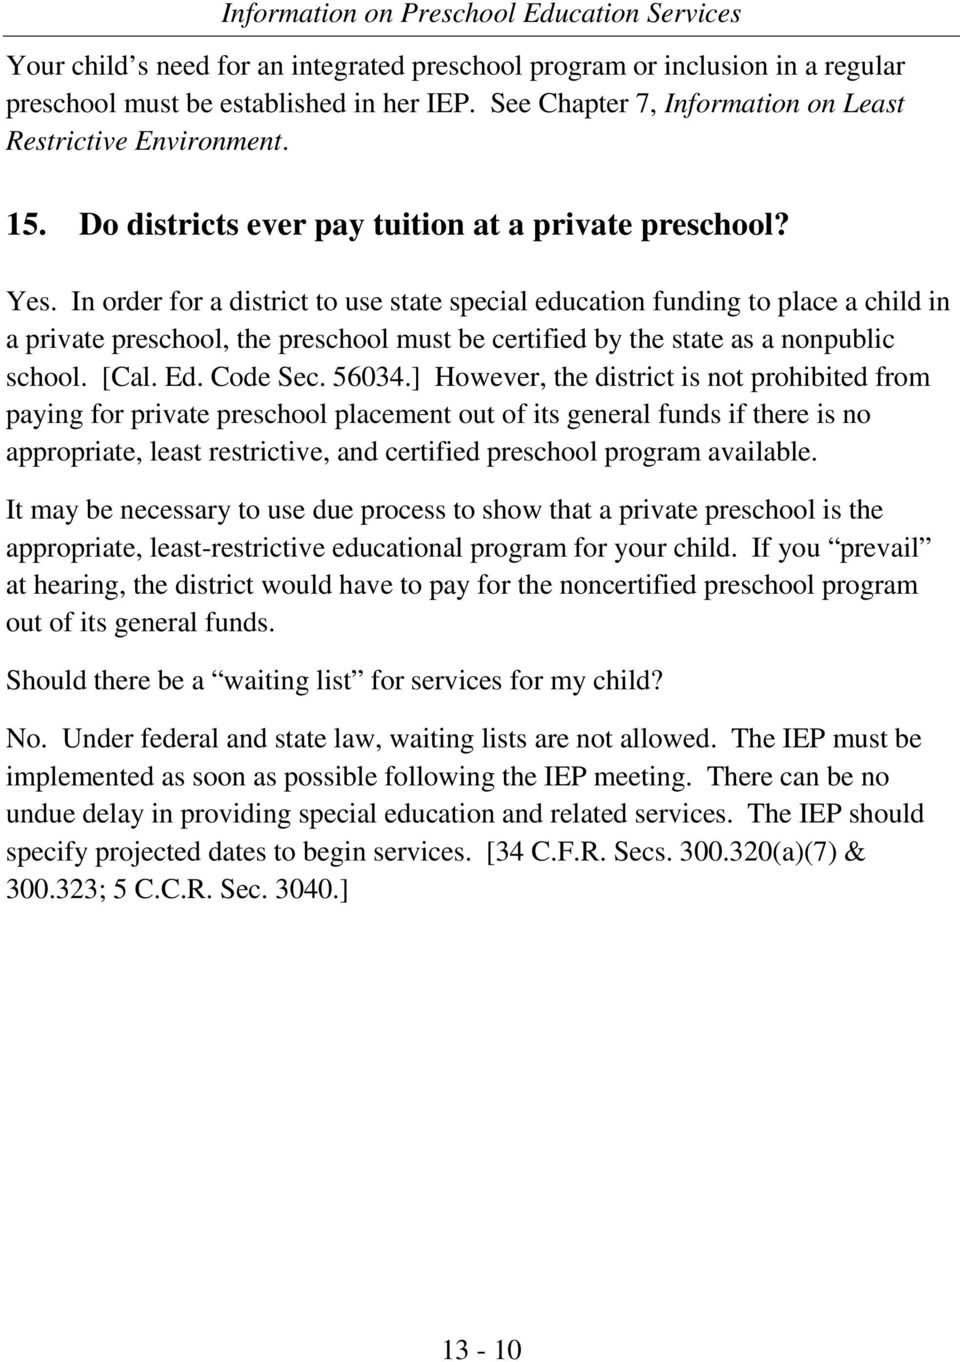 In order for a district to use state special education funding to place a child in a private preschool, the preschool must be certified by the state as a nonpublic school. [Cal. Ed. Code Sec. 56034.